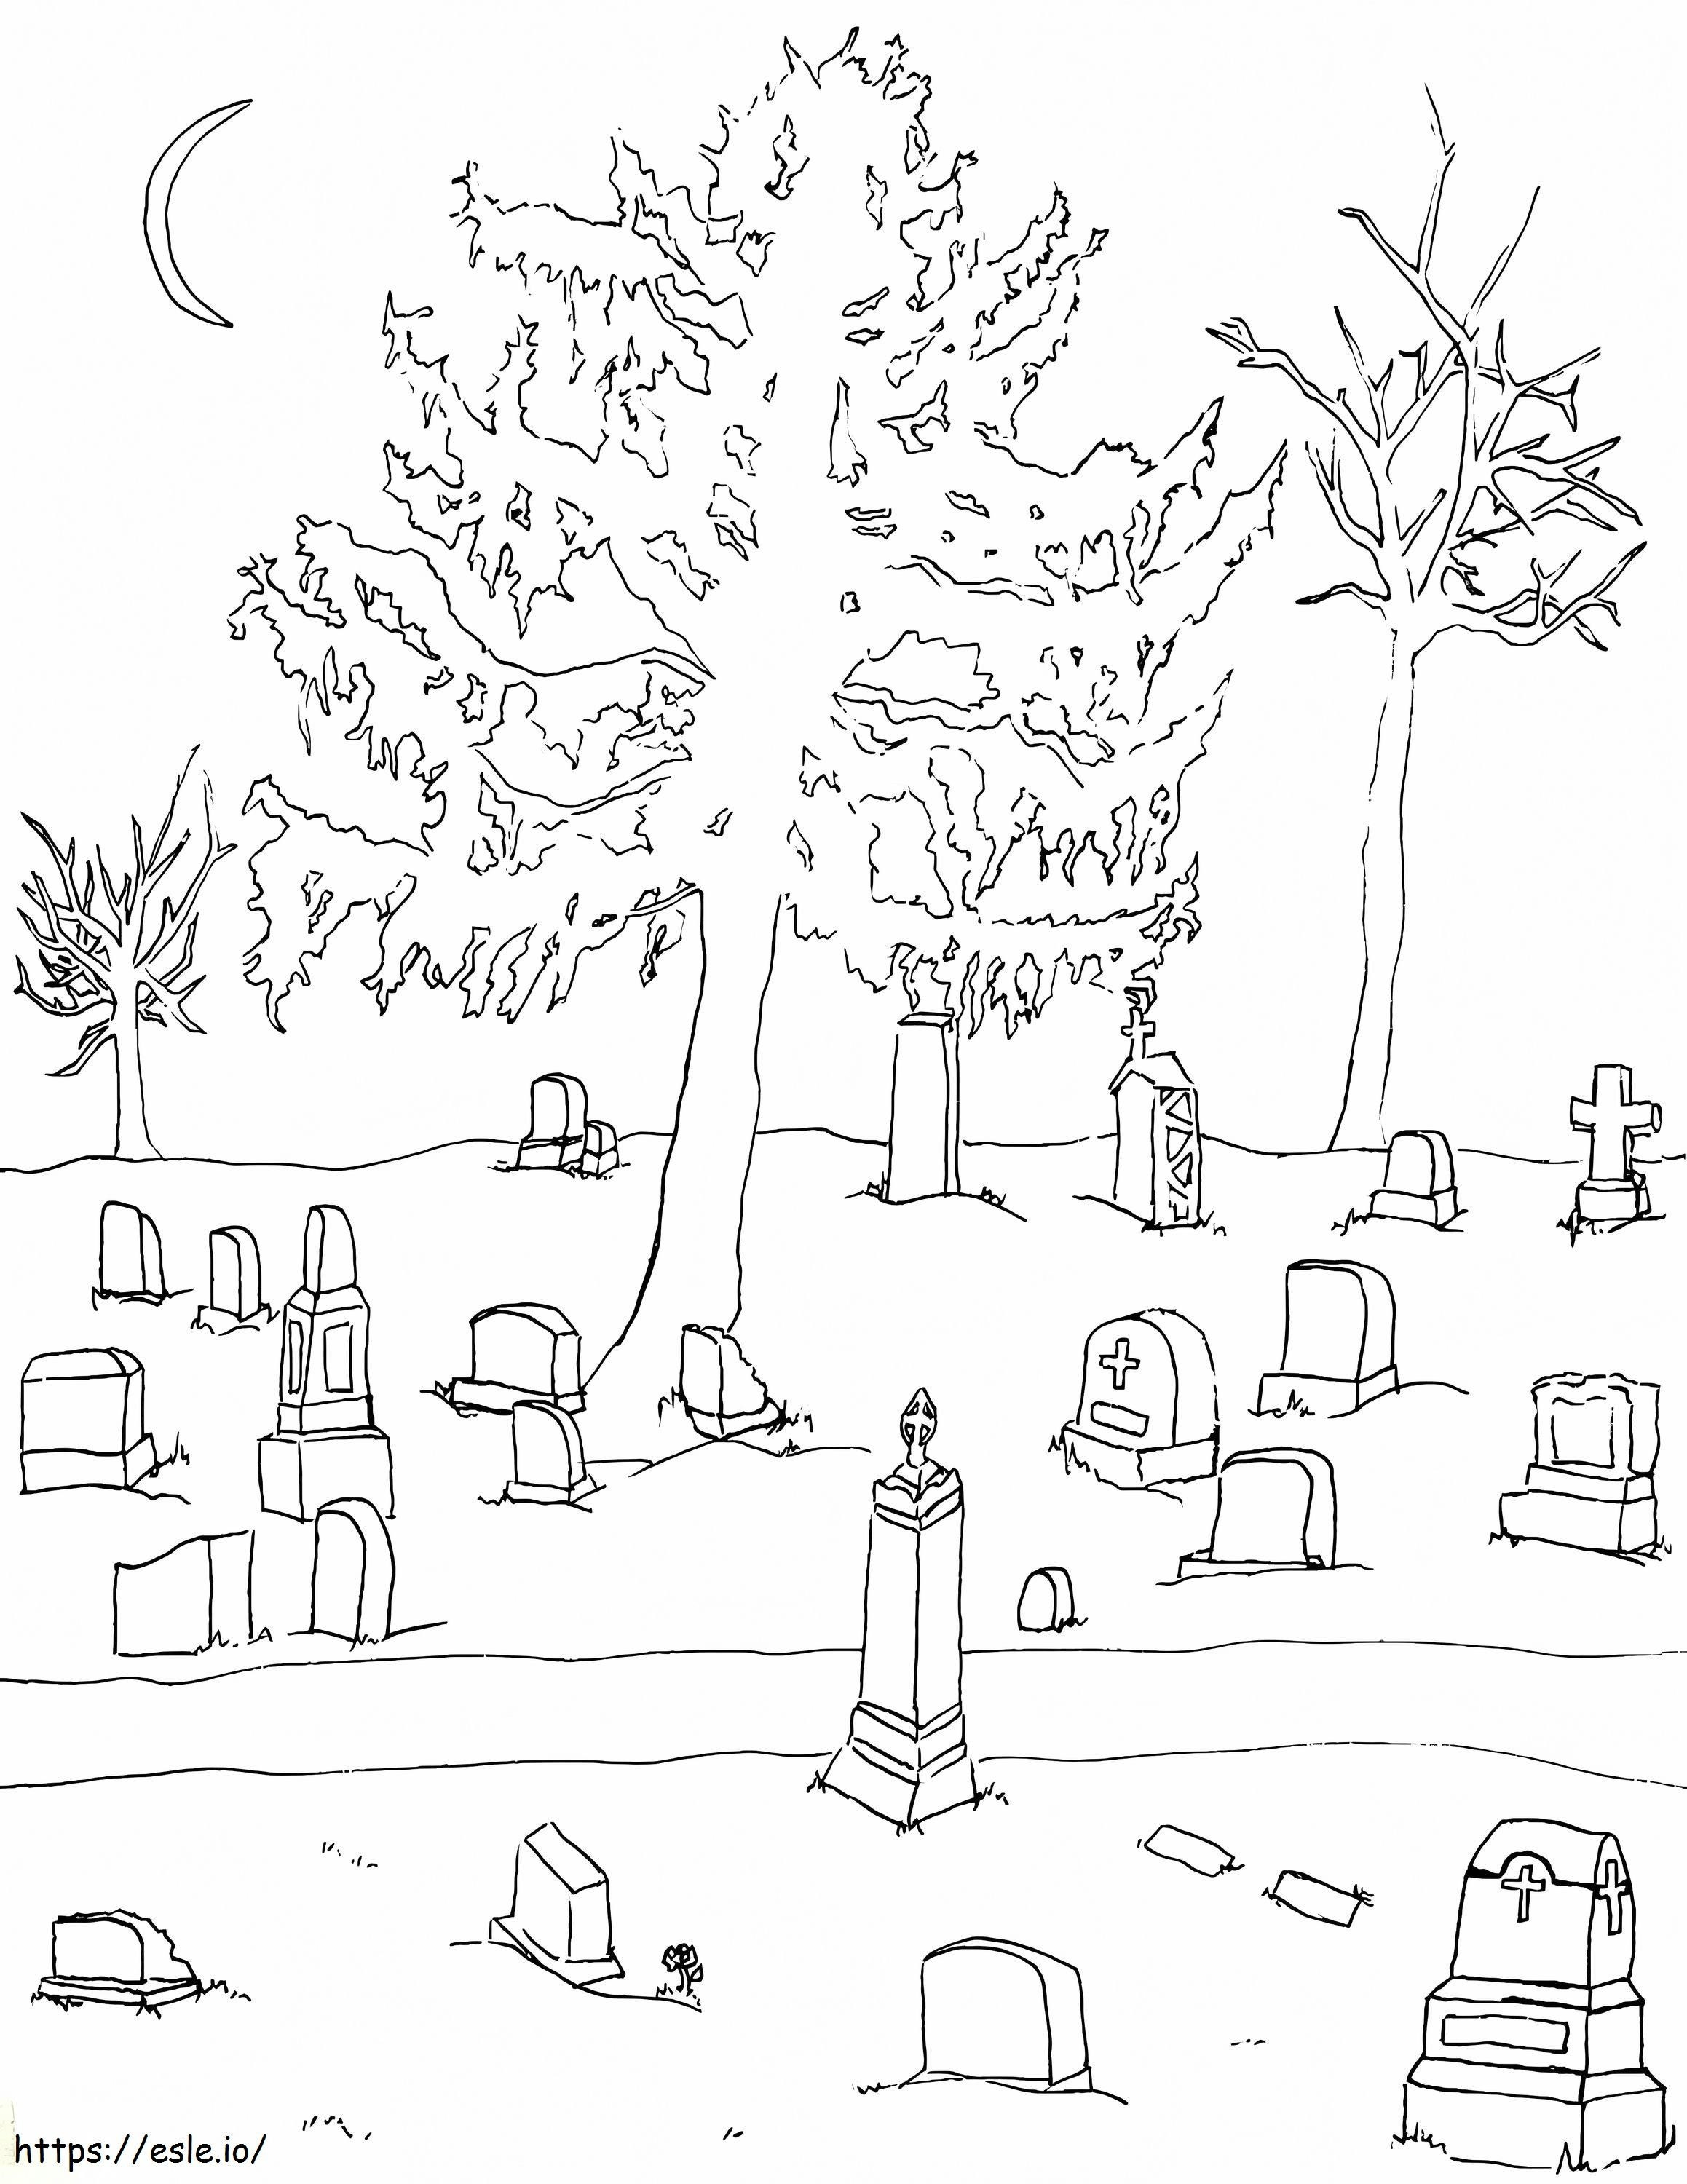 Cemetery coloring page